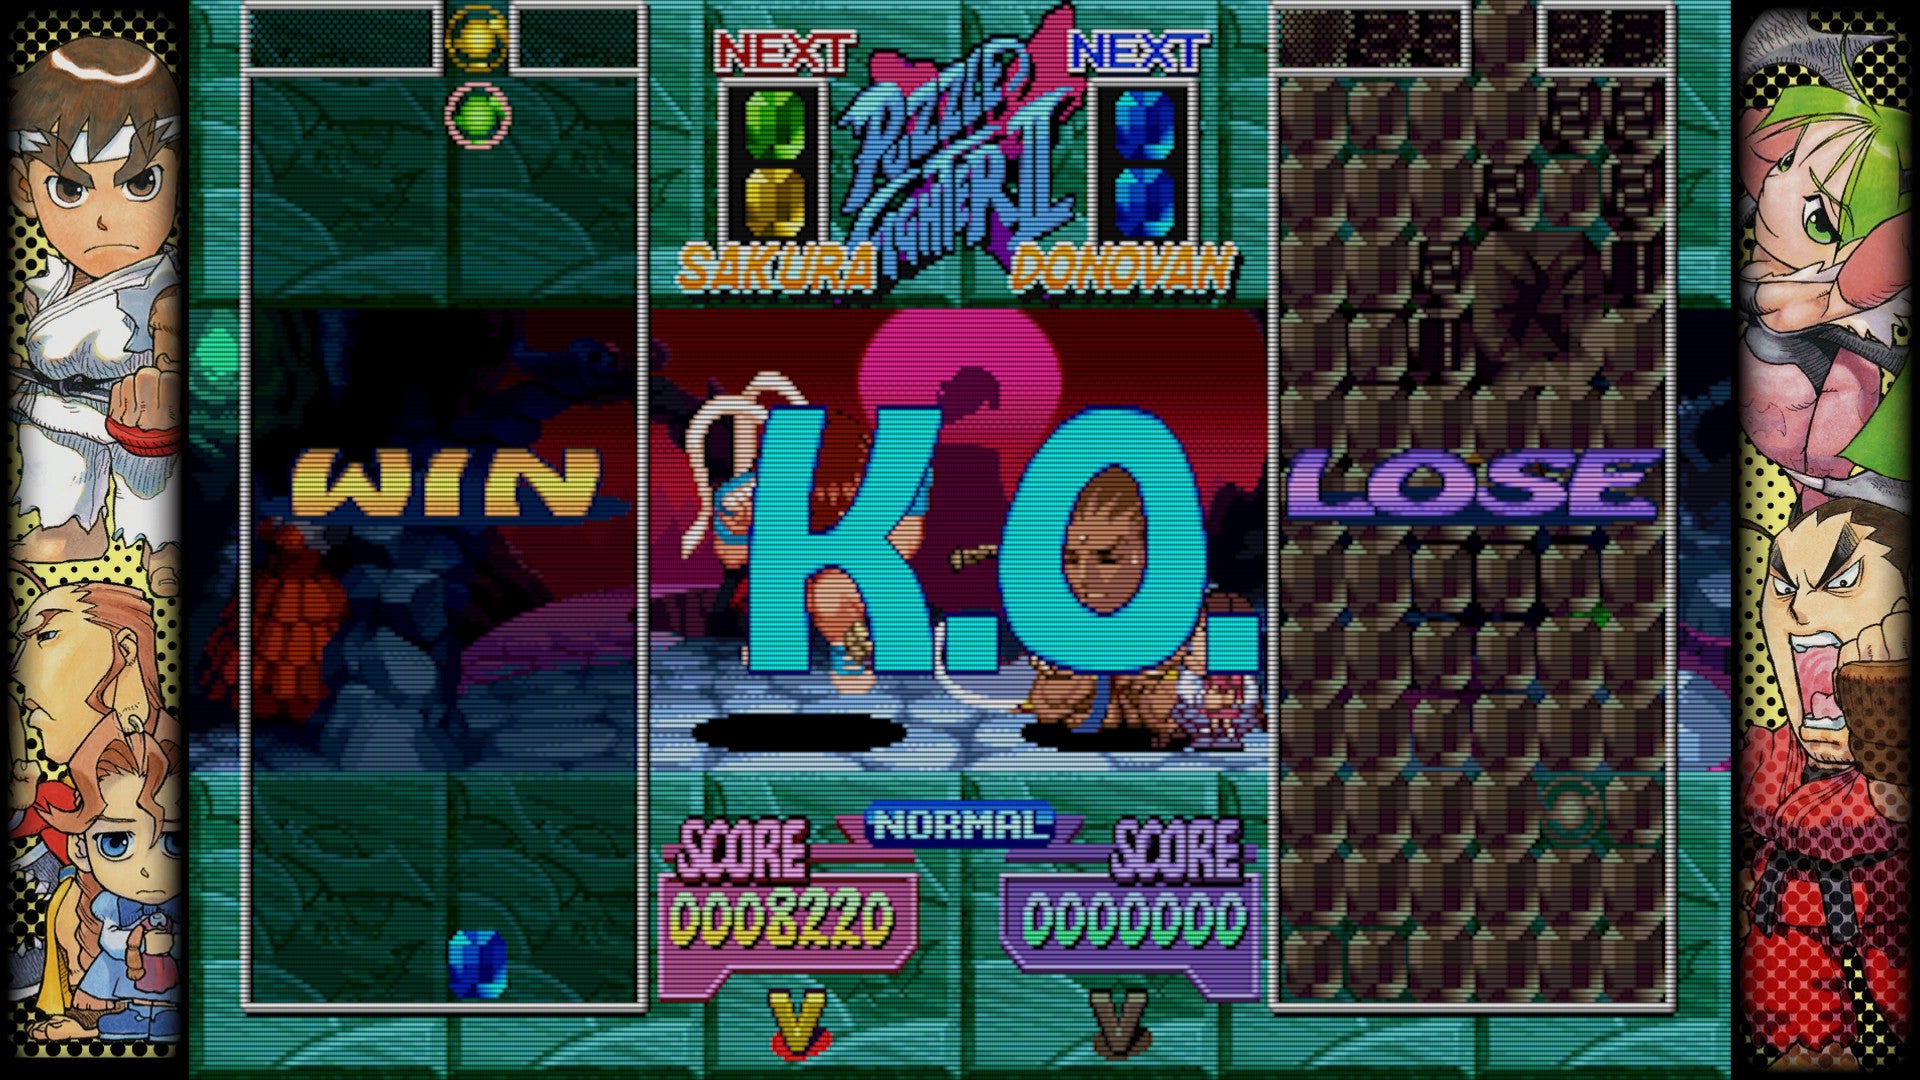 A screenshot from Puzzle Fighter in the Capcom Fighting Collection